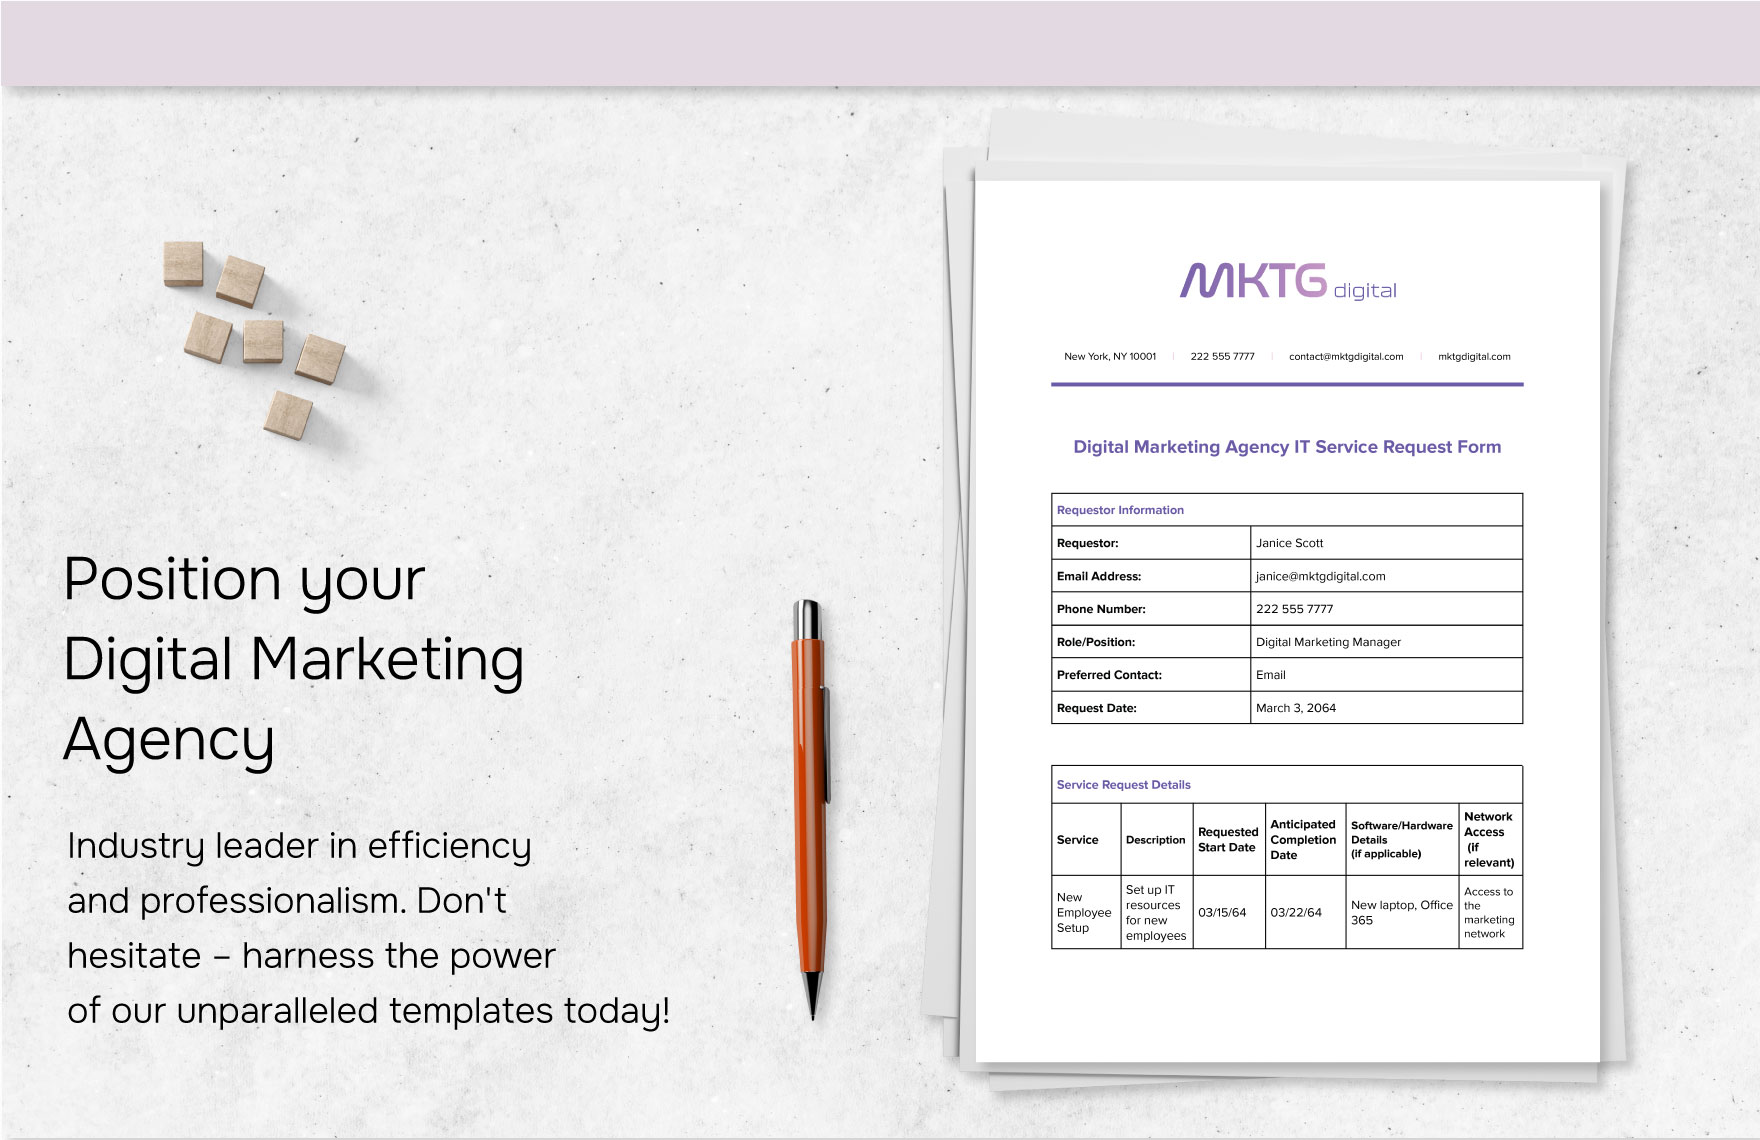 Digital Marketing Agency IT Service Request Form Template